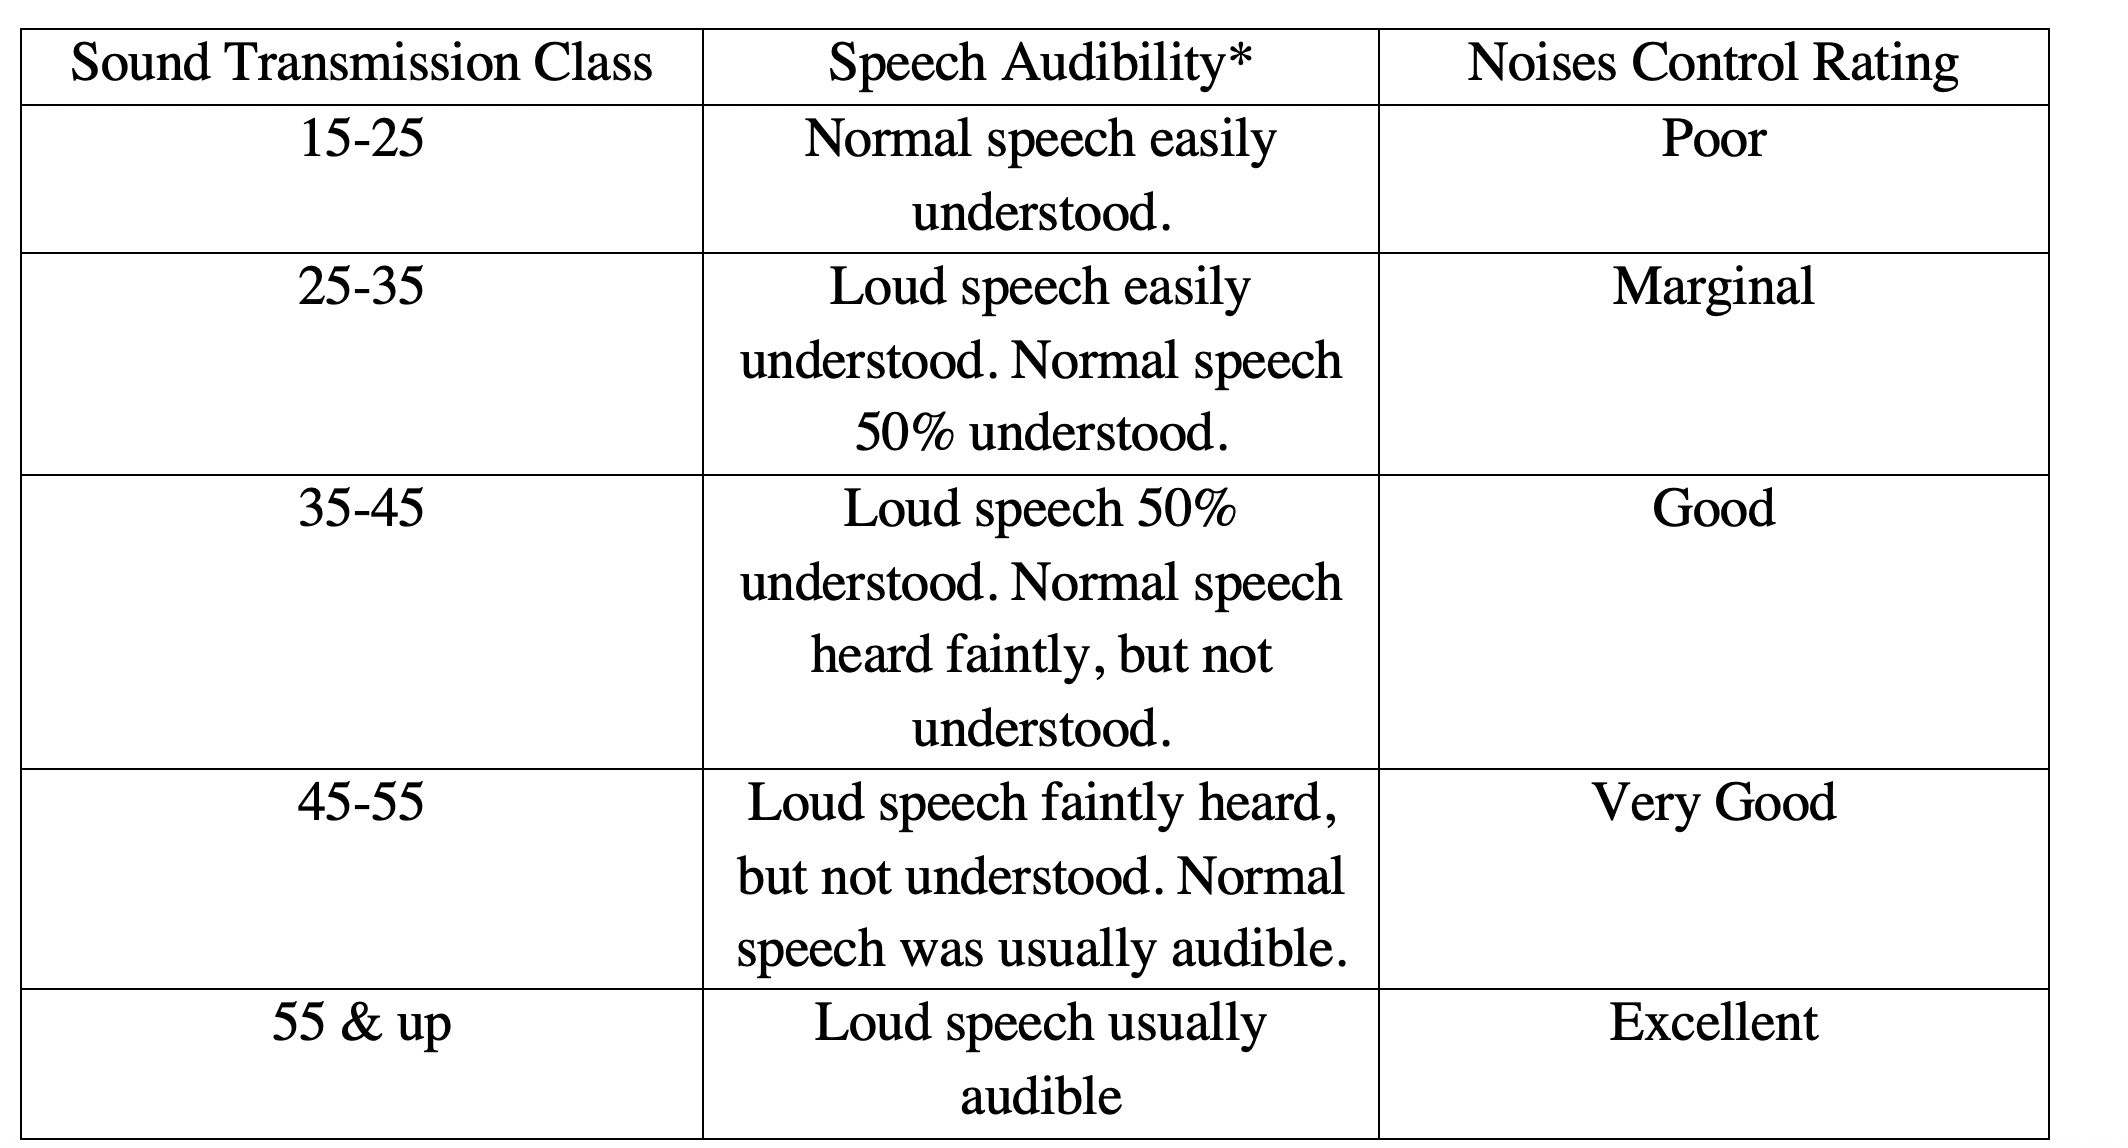 Figure 1 – Sound Transmission Class Ratings (Source: Adapted from NIAIMA’s Noise Control).